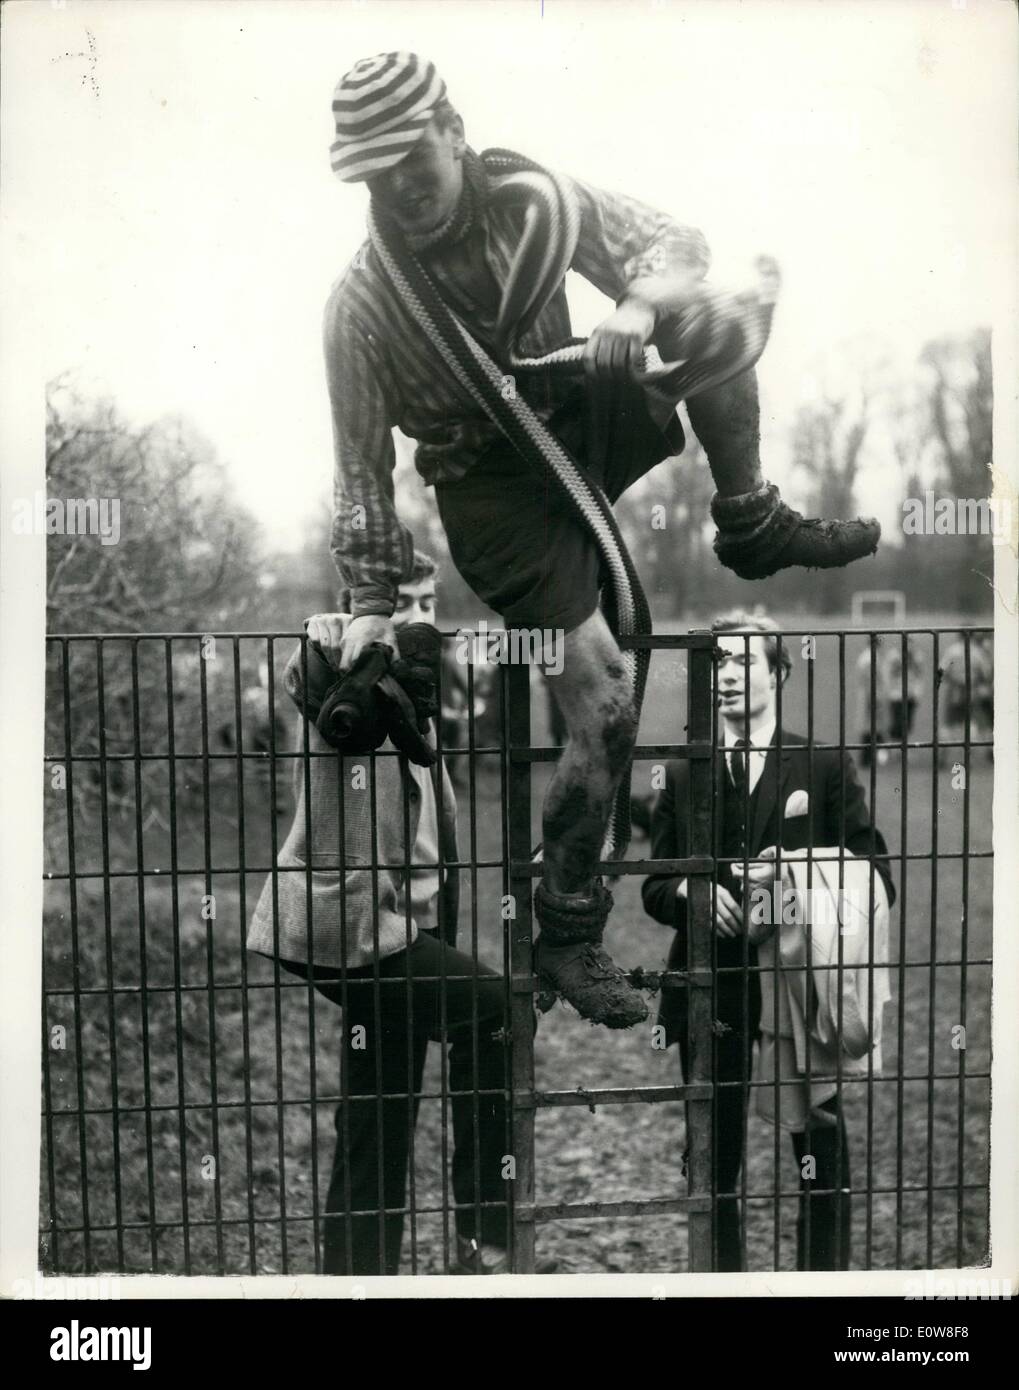 Nov. 11, 1961 - Annual St. Andrew's Day wall game - at Eton: The 110th. Annual Eton Wall Game was held this afternoon - when the Collegians obtained the first definite result in six years - by beating the Oppidanse by 2 points to Nil... Photo shows Daniel Hodson, on of the Collegians, climbs over a fence after the completion of the game today. Stock Photo